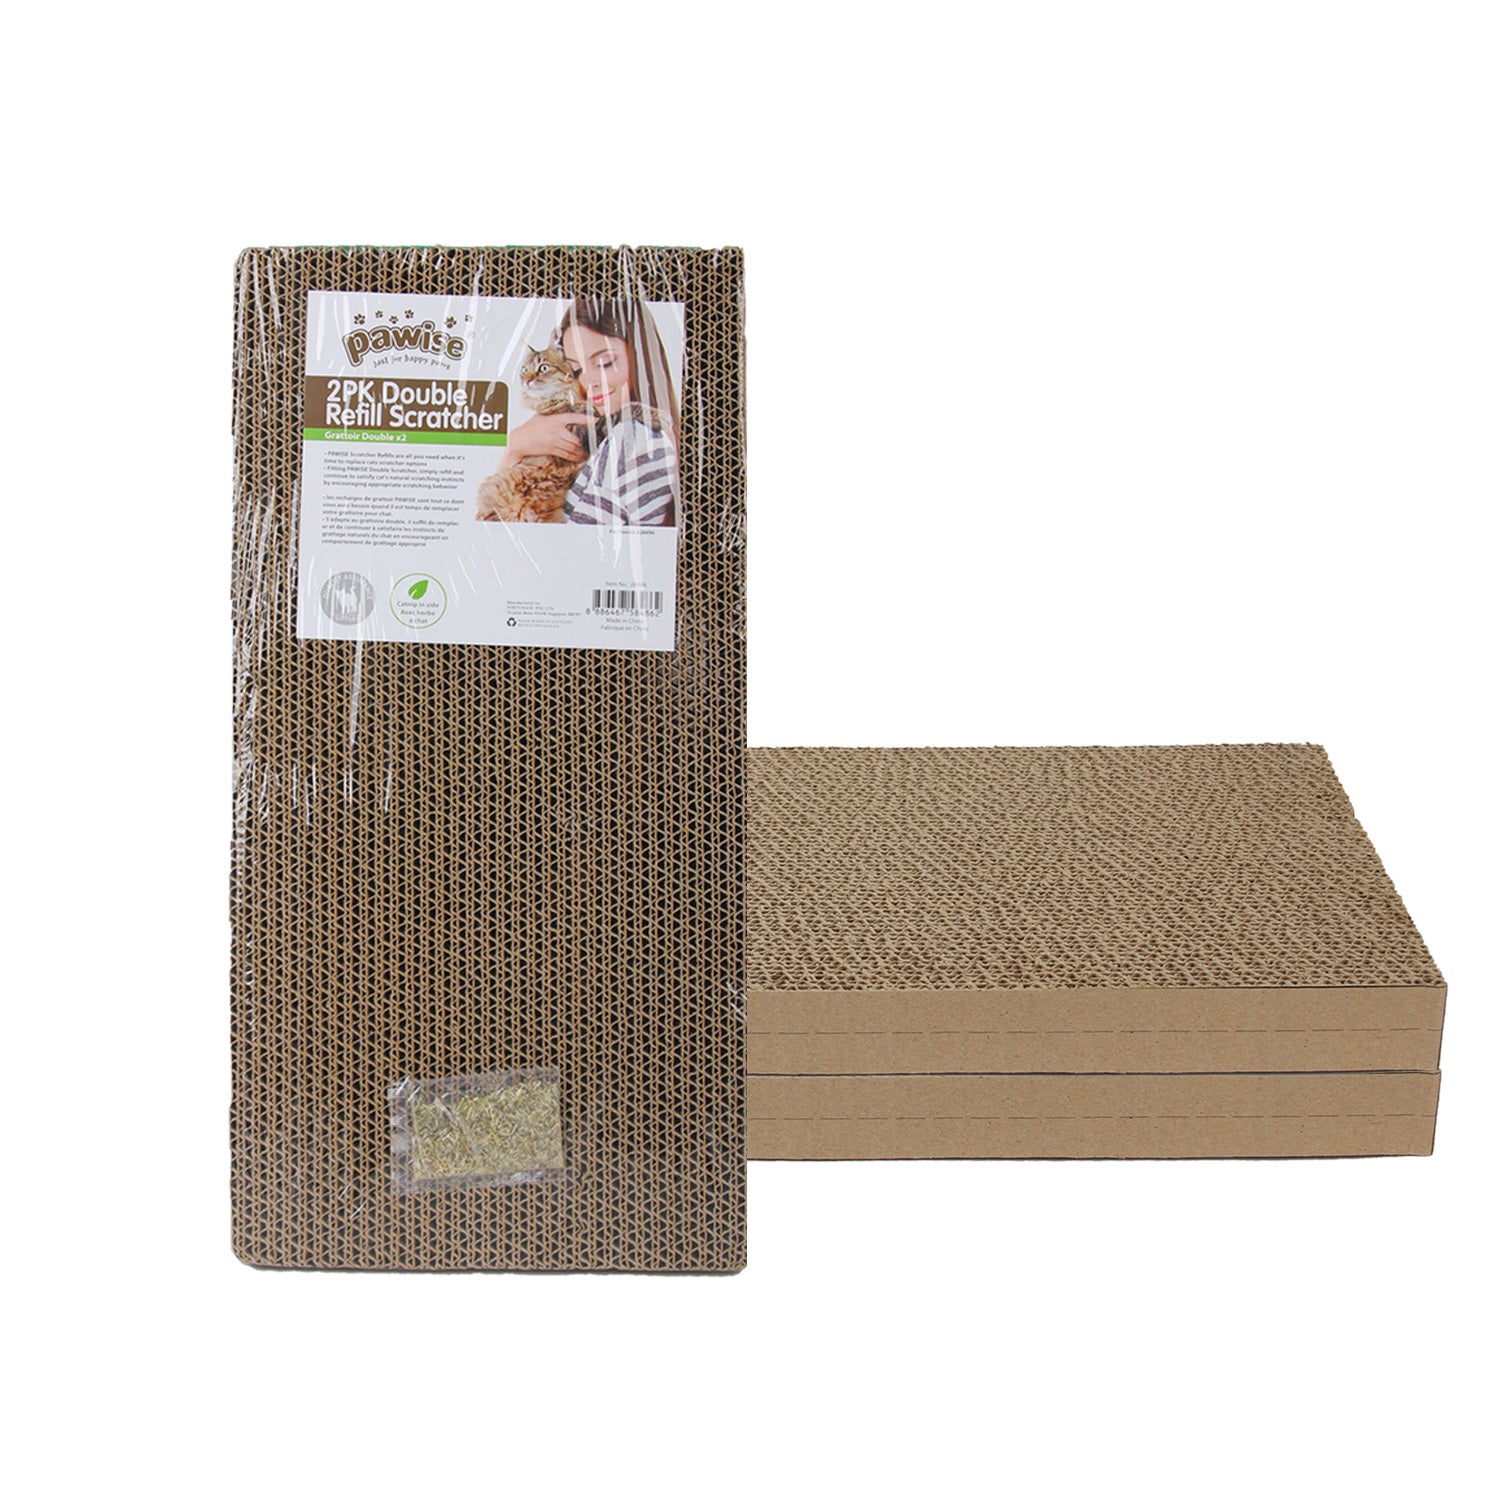 PAWISE 2PK Double Refill Scratcher Pad Recycled Corrugated Cat Scratching Pads